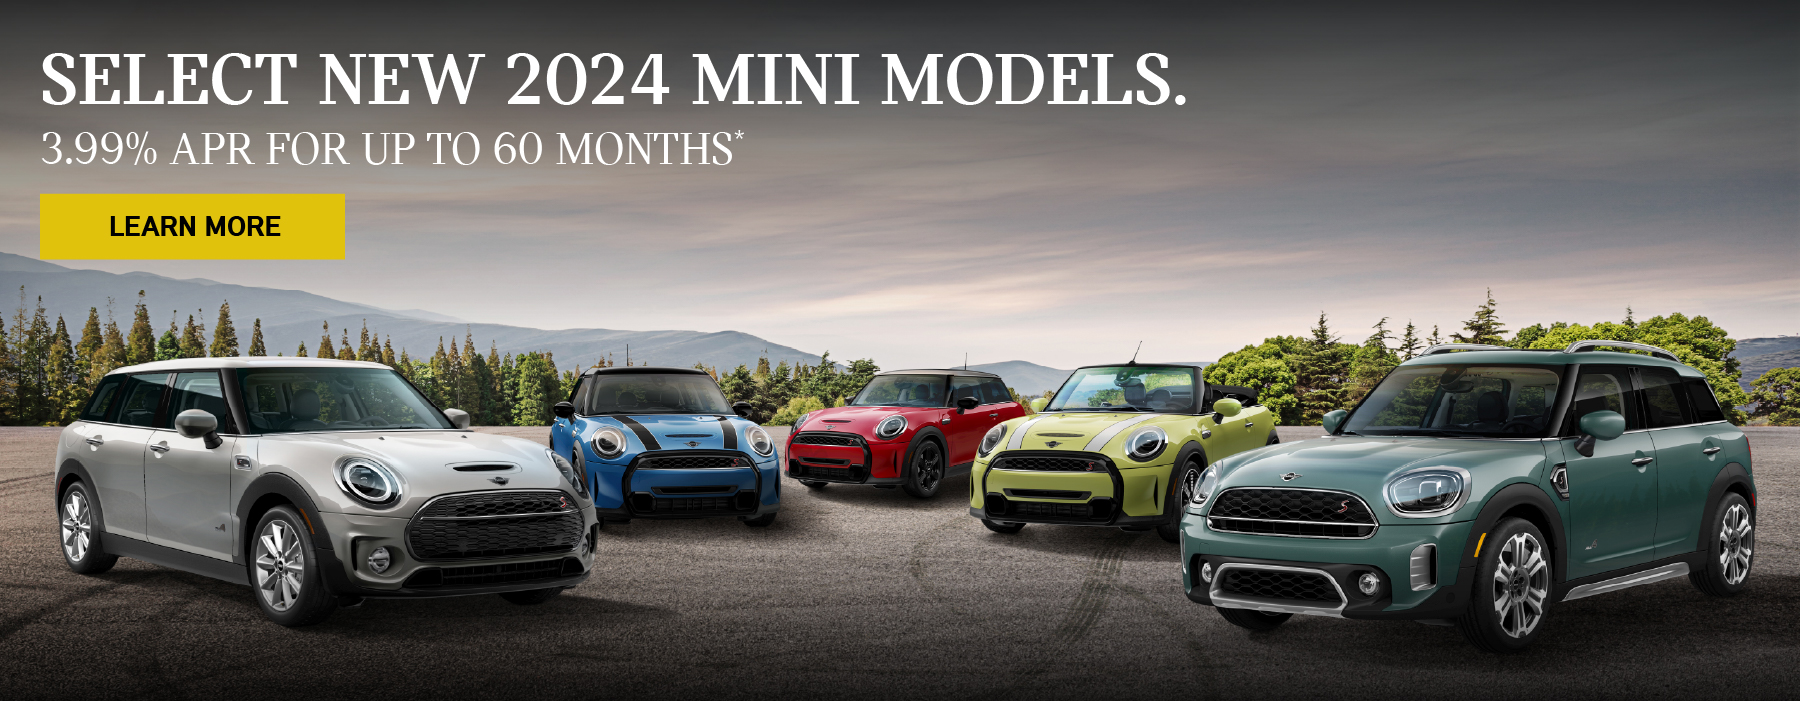 SELECT NEW 2024 MINI MODELS. 3.99% APR FOR UP TO 60 MONTHS* | Learn More